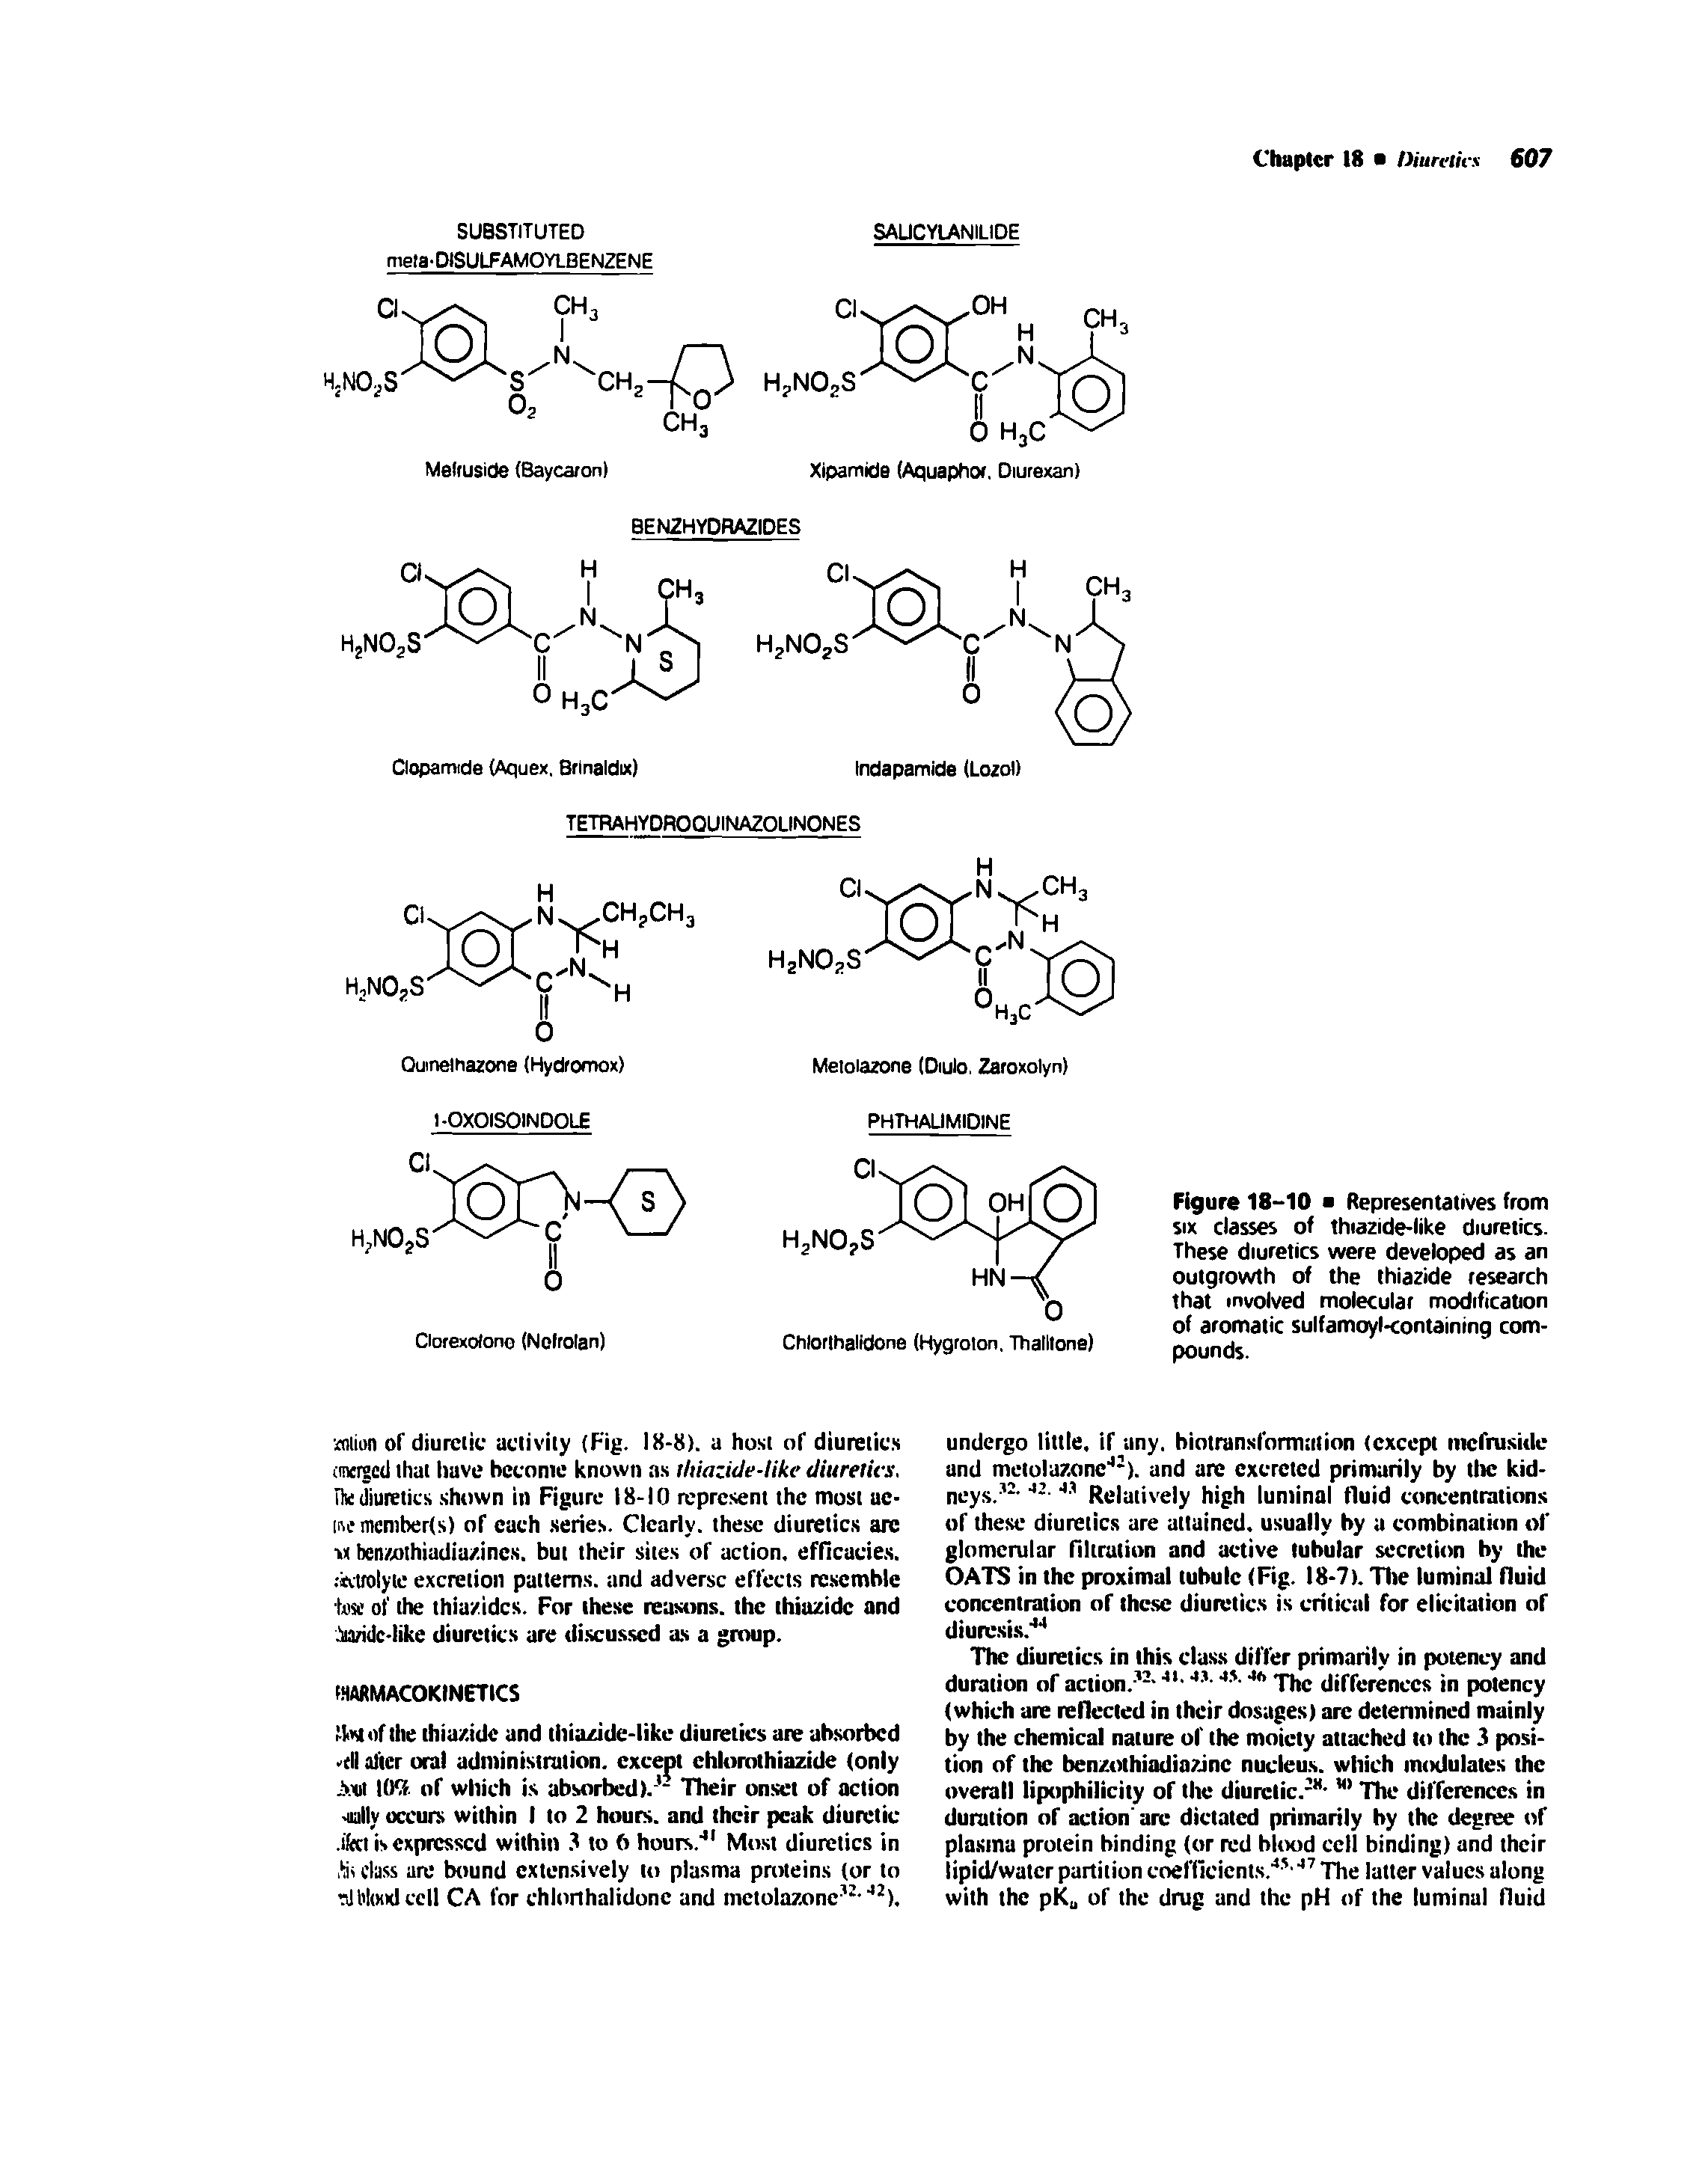 Figure 18-10 Representatives from SIX classes of thiazide-like diuretics. These diuretics were developed as an outgrowth of the thiazide research that involved molecular modification of aromatic sulfamoyl<ontaining compounds.